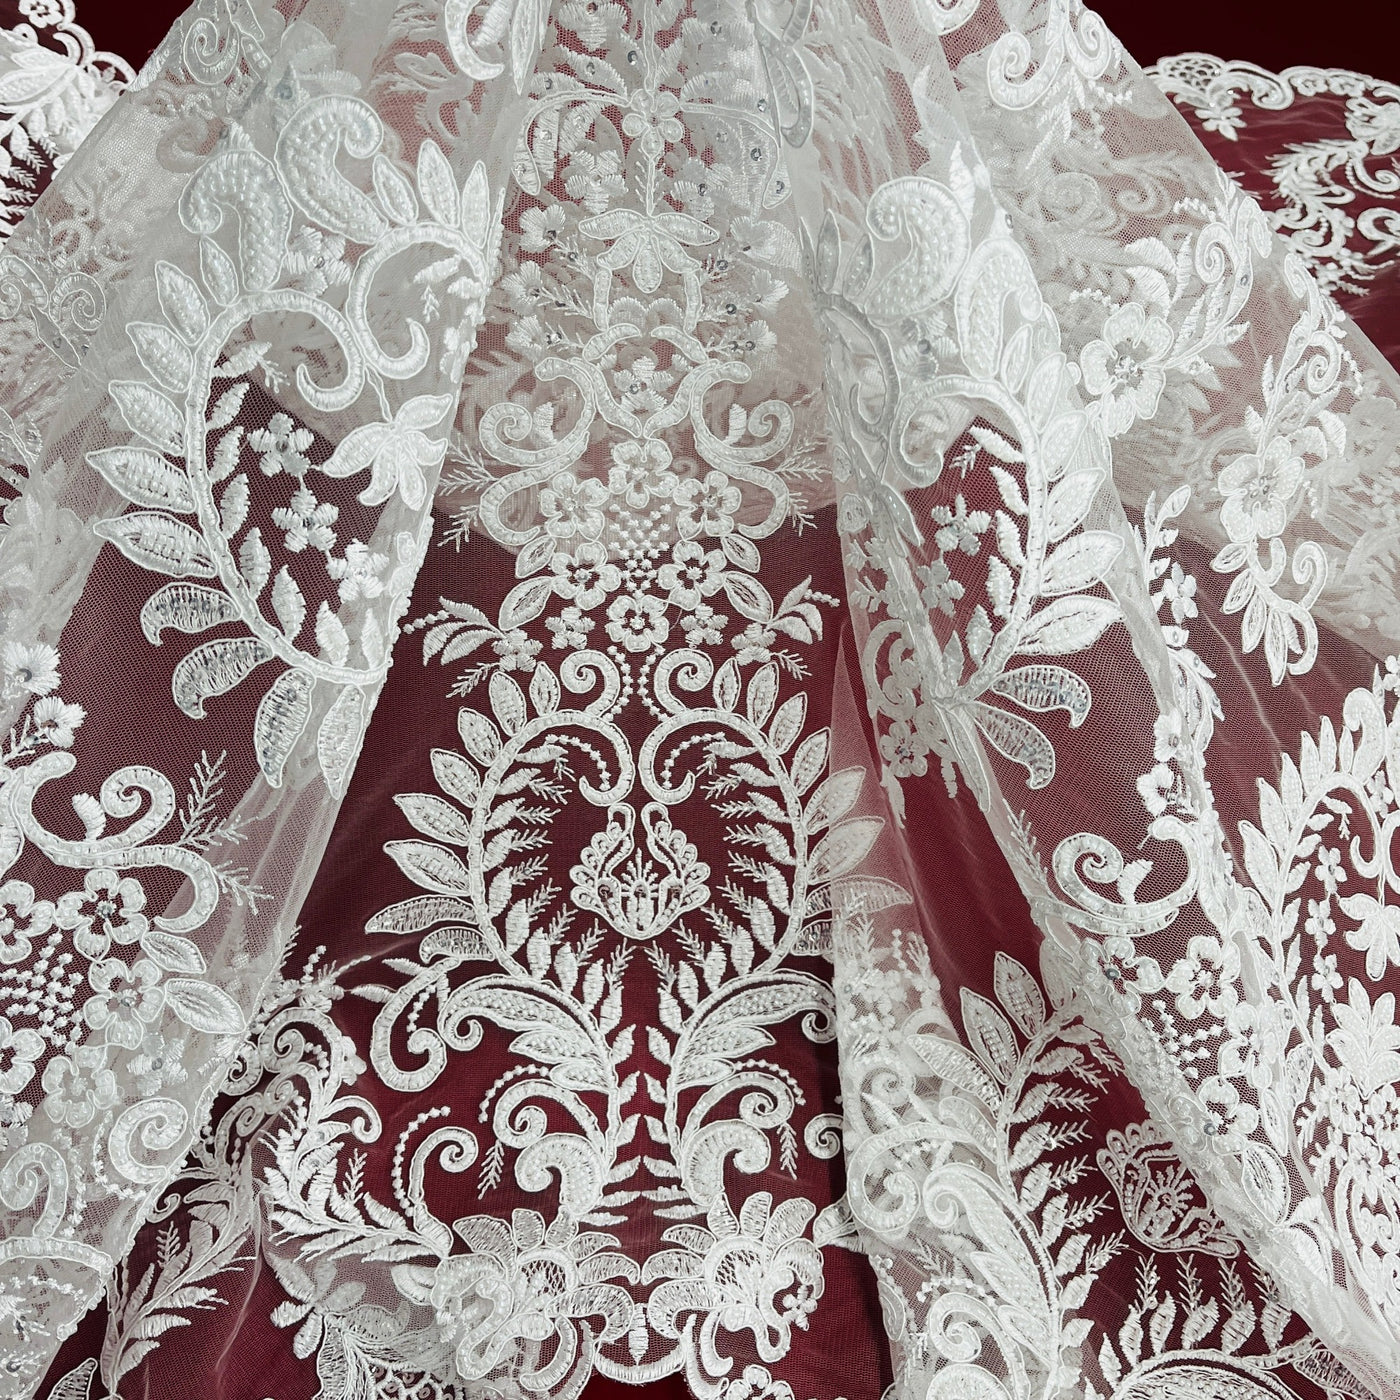 Beaded & Corded Bridal Lace Fabric Embroidered on 100% Polyester Net Mesh | Lace USA - 97160W-HB White